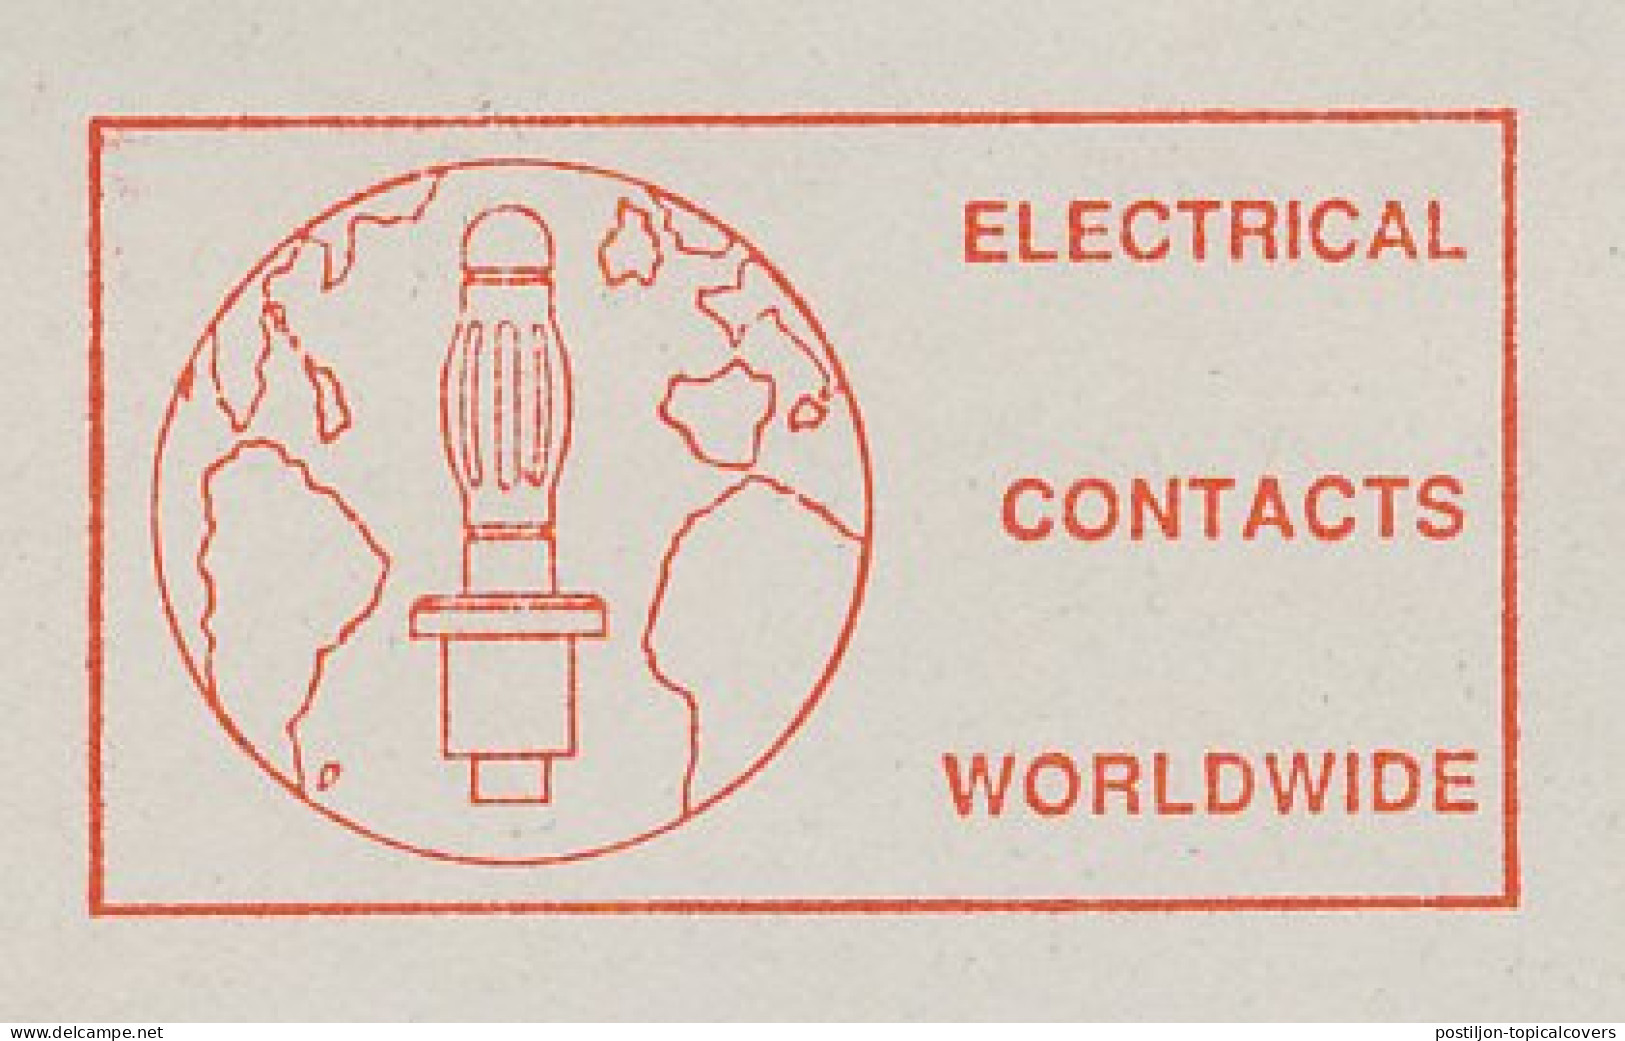 Meter Cut Germany 1995 Electrical Contacts - World Map - Electricité